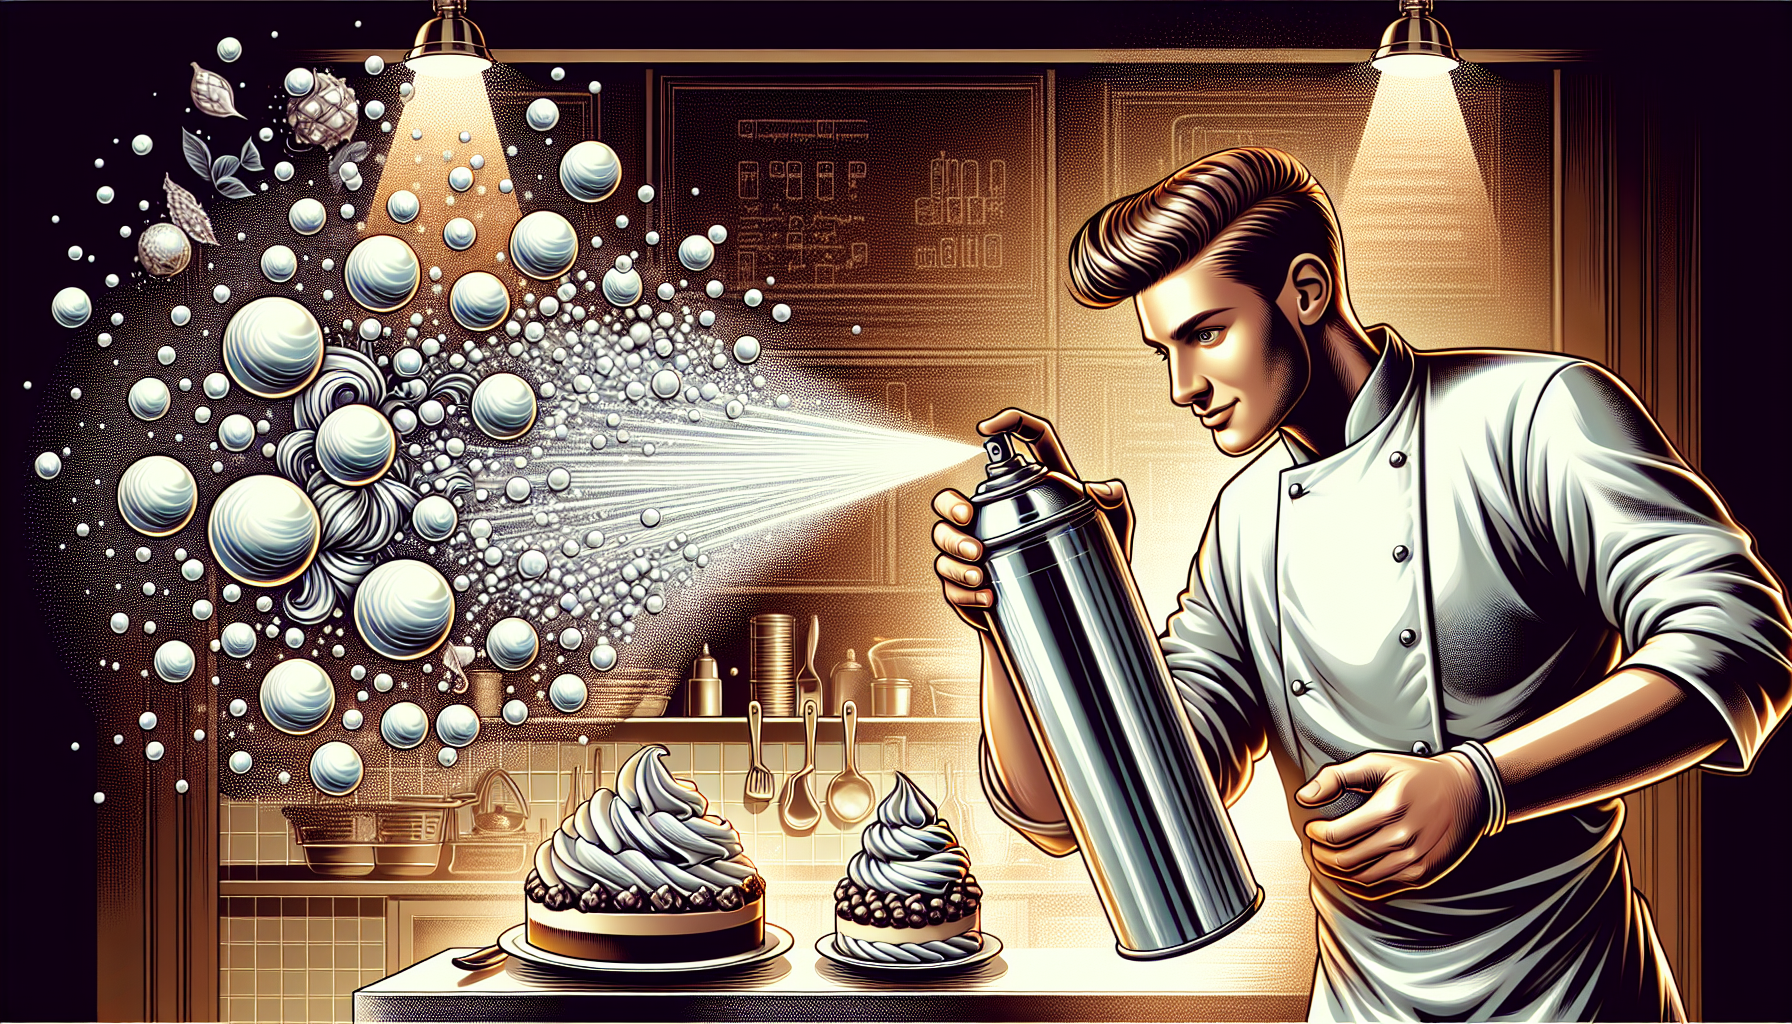 Illustration of a chef using a whipped cream canister in a kitchen